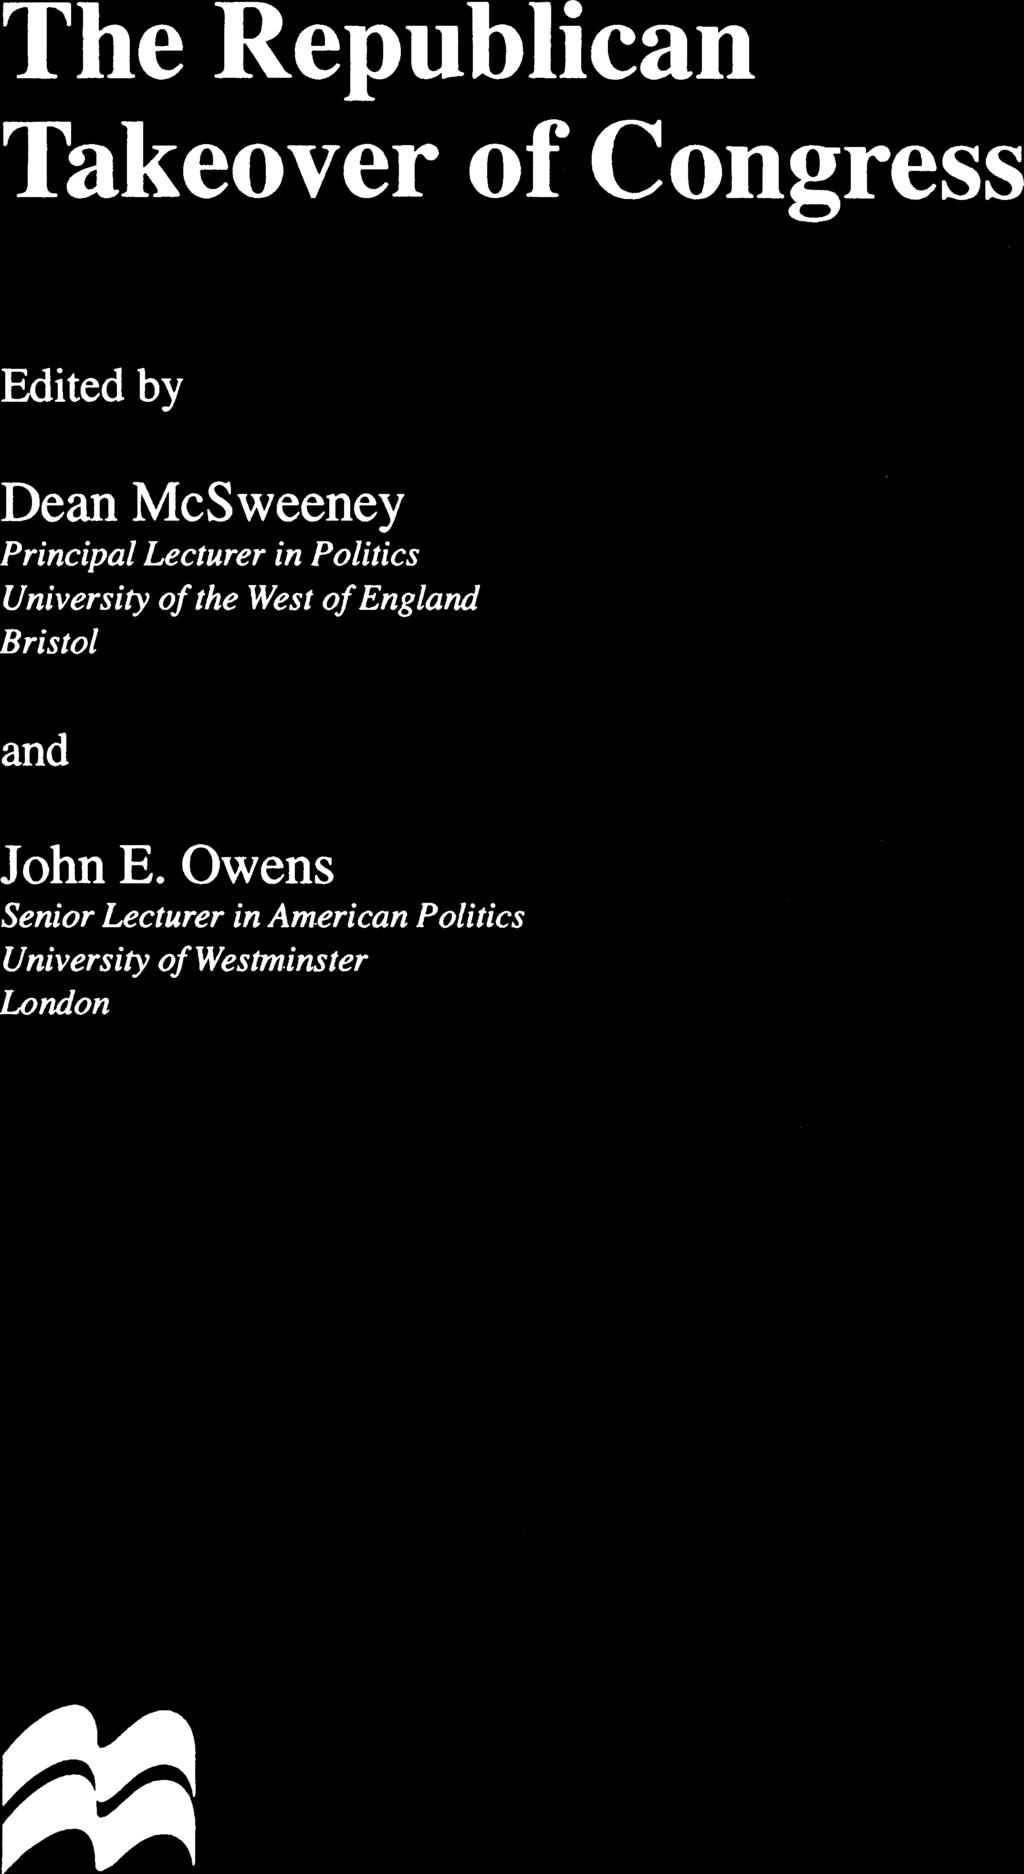 The Republican Takeover of Congress Edited by Dean McSweeney Principal Lecturer in Politics University of the